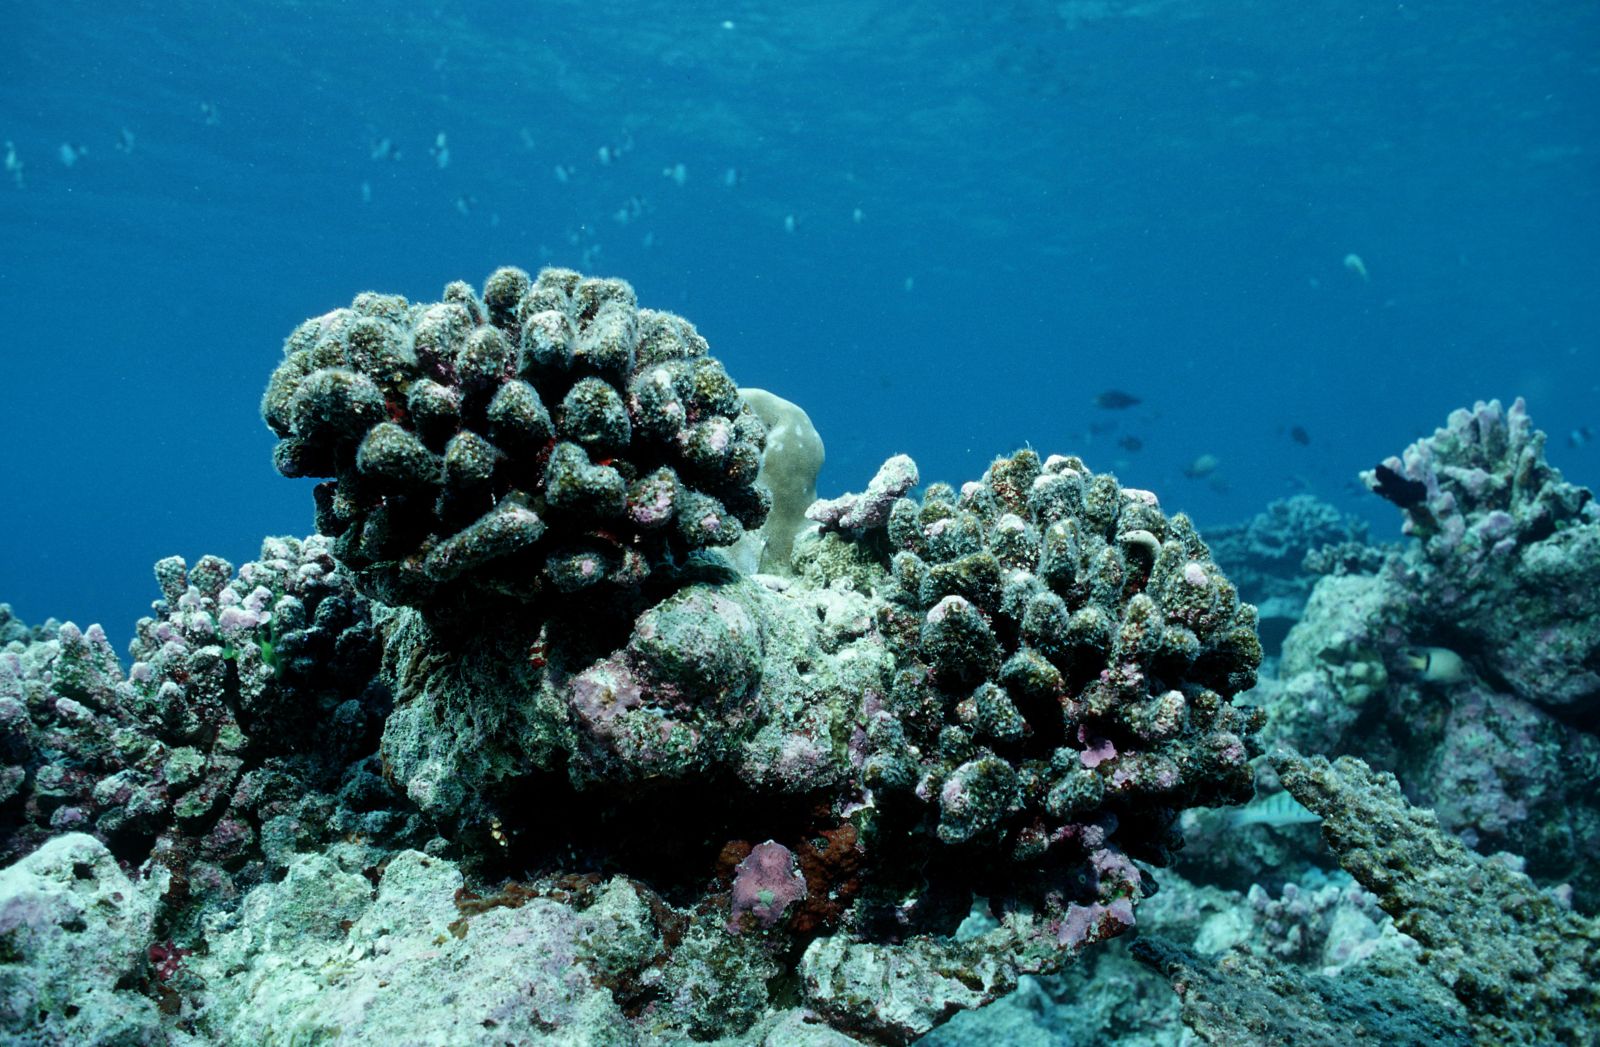 Dead coral reef near the Maldives in the Indian Ocean.